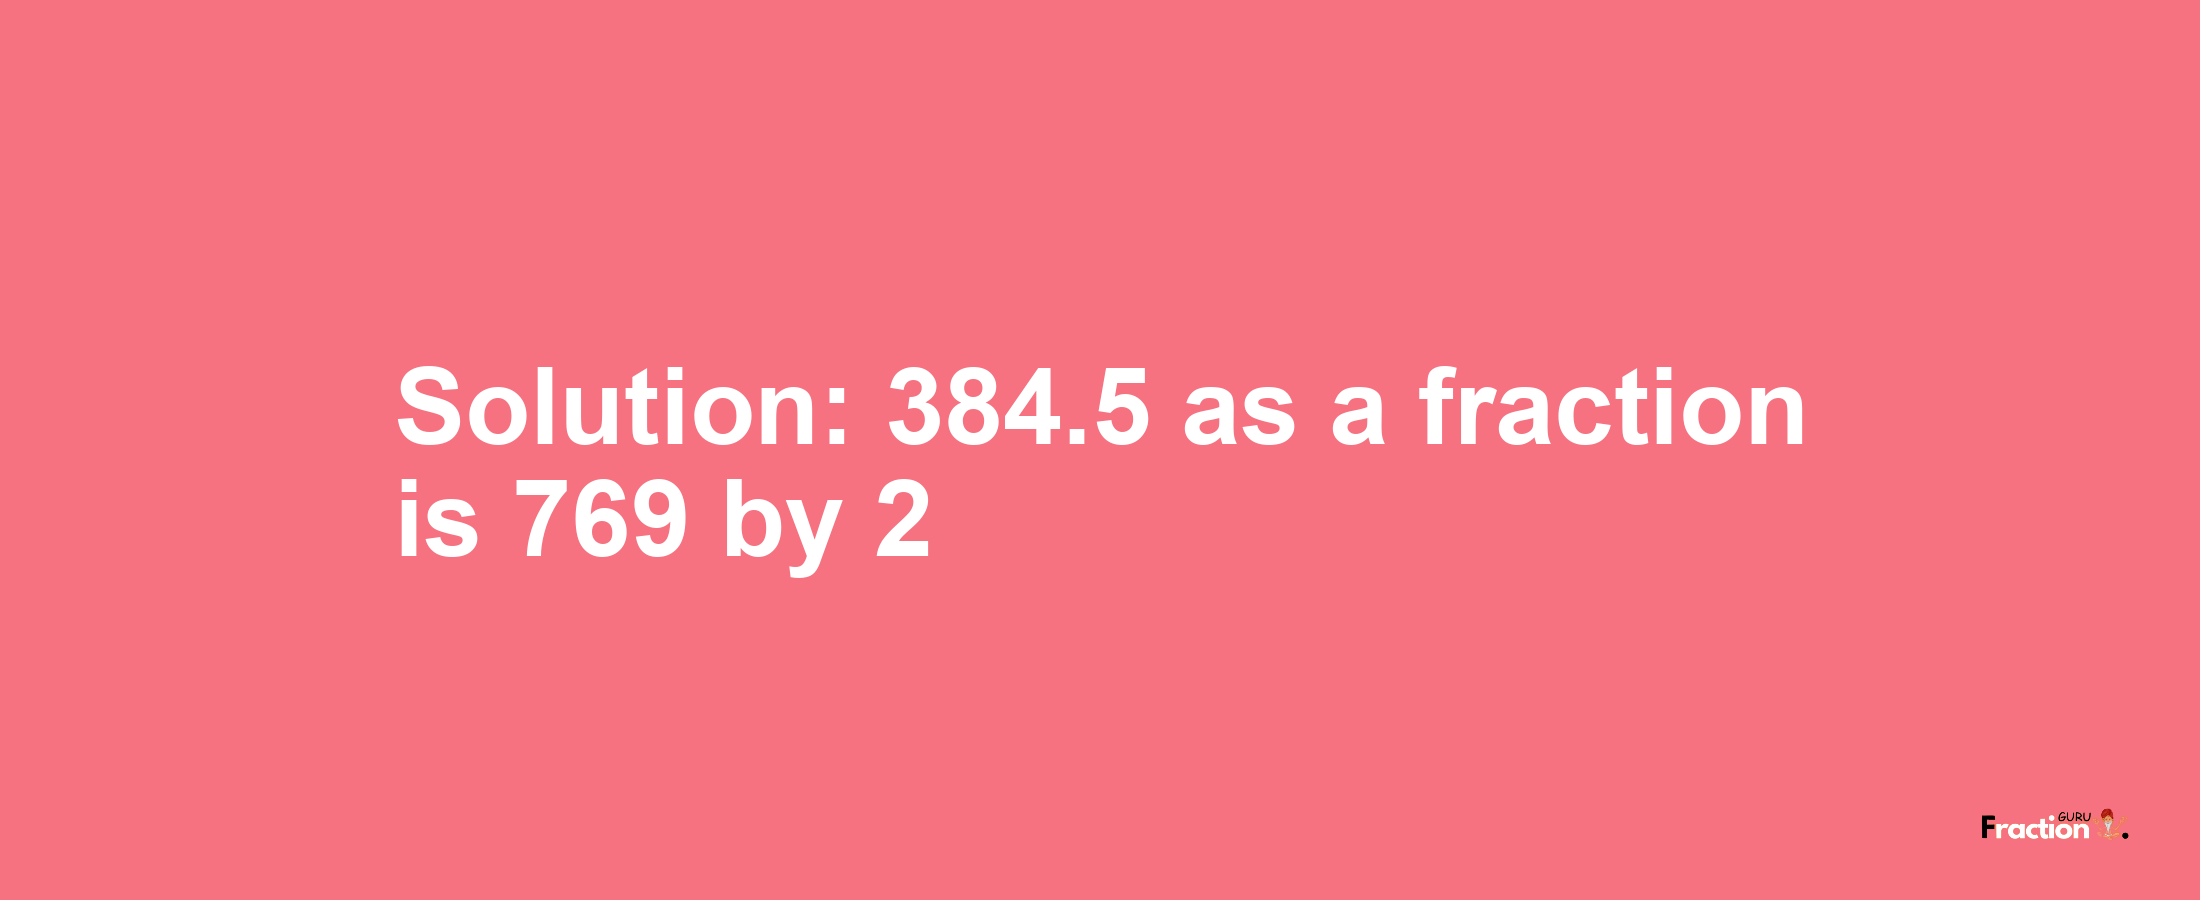 Solution:384.5 as a fraction is 769/2